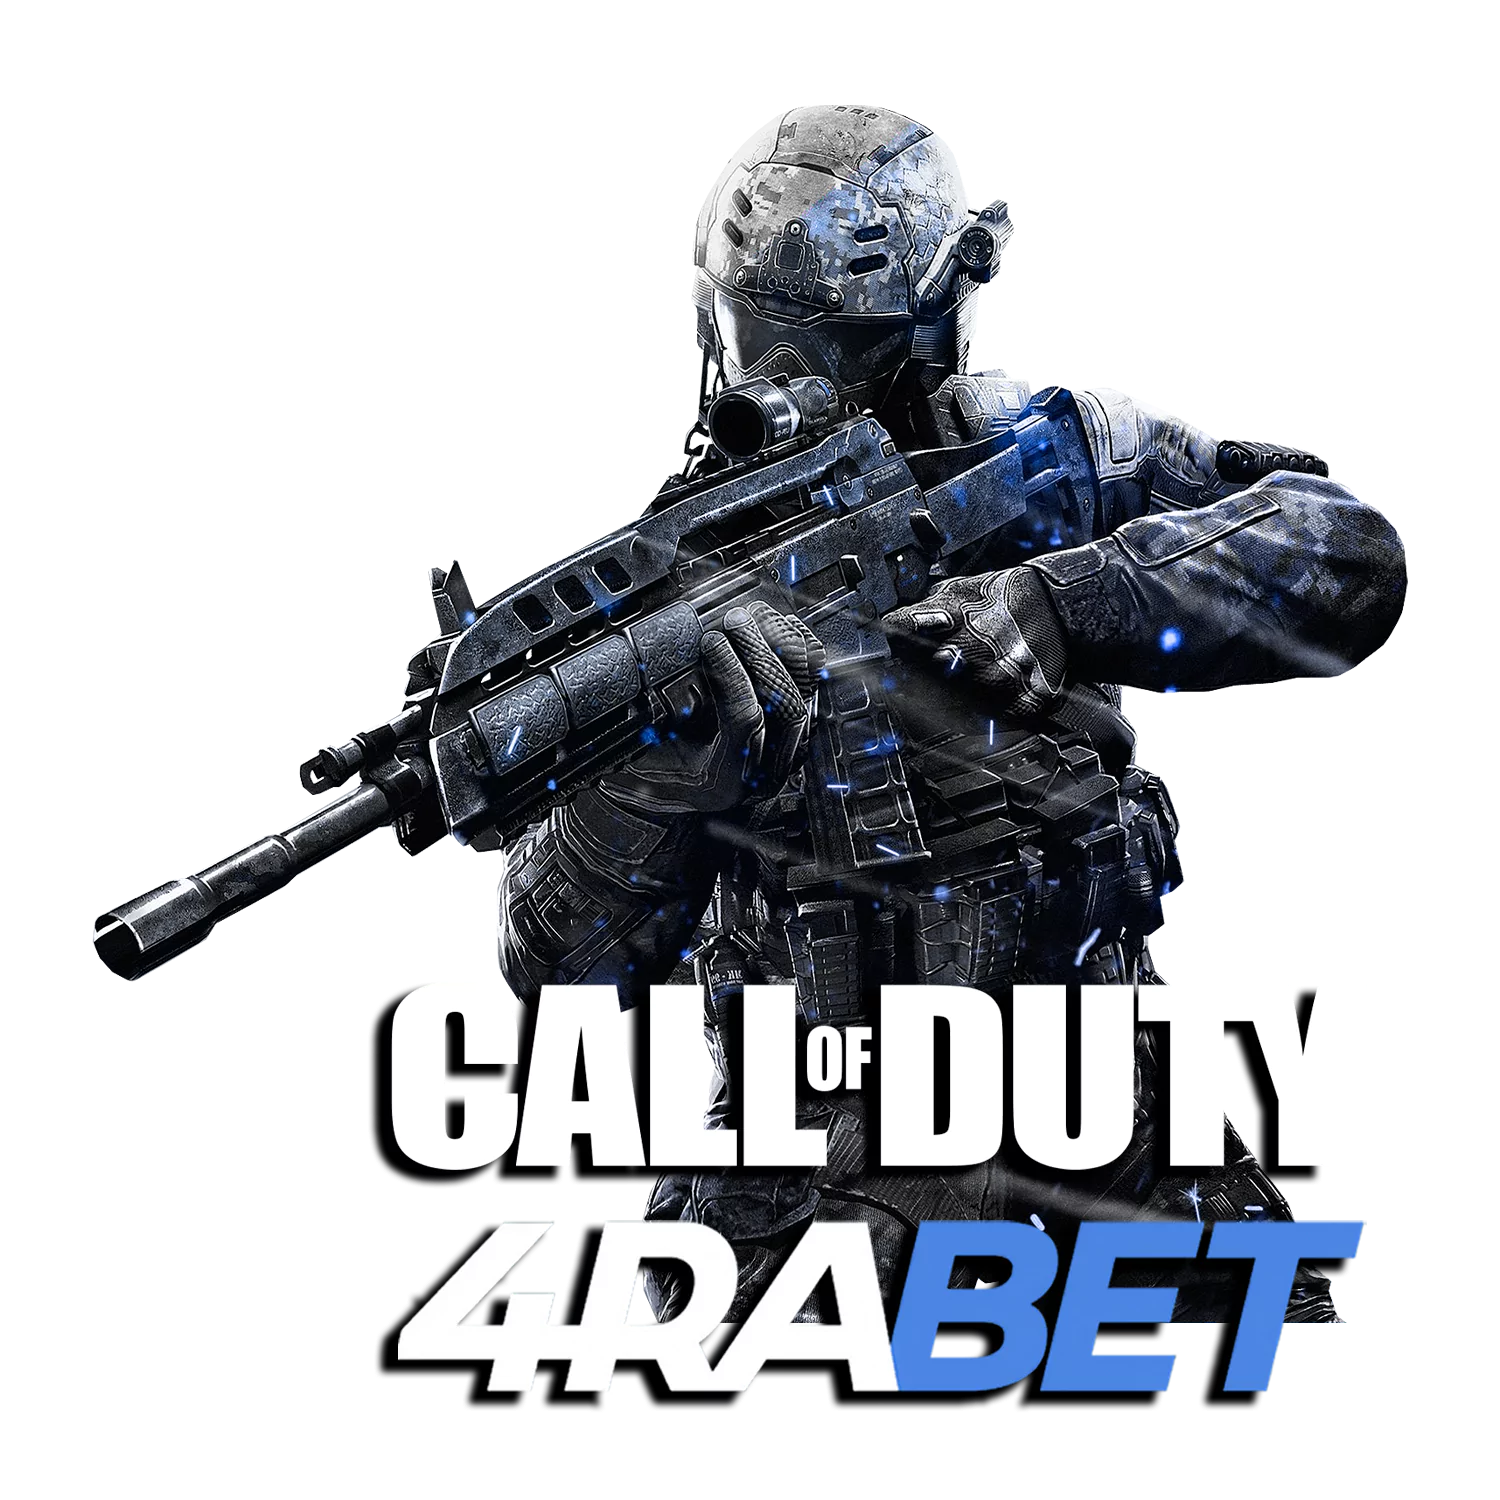 Learn how to bet on the Call of Duty events at 4rabet.